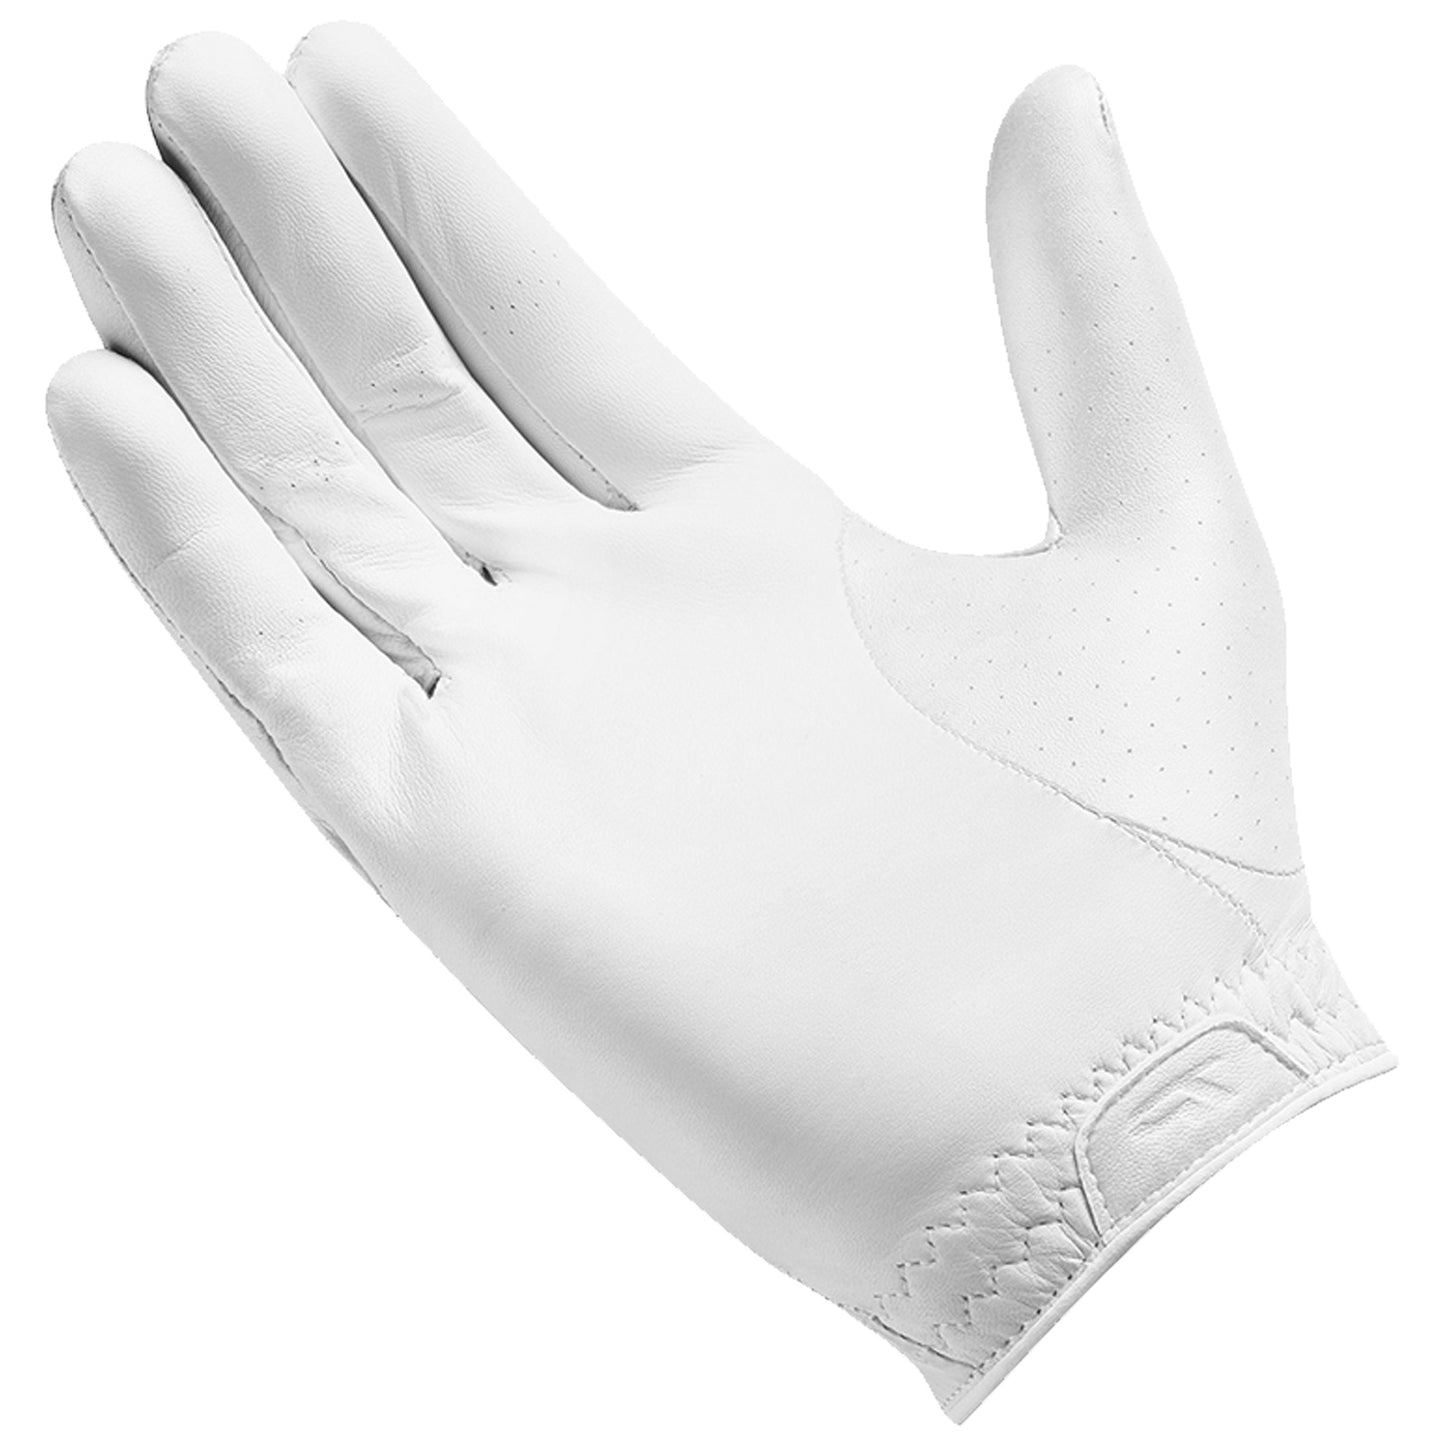 TaylorMade Ladies RIGHT Hand Tour Preferred Glove